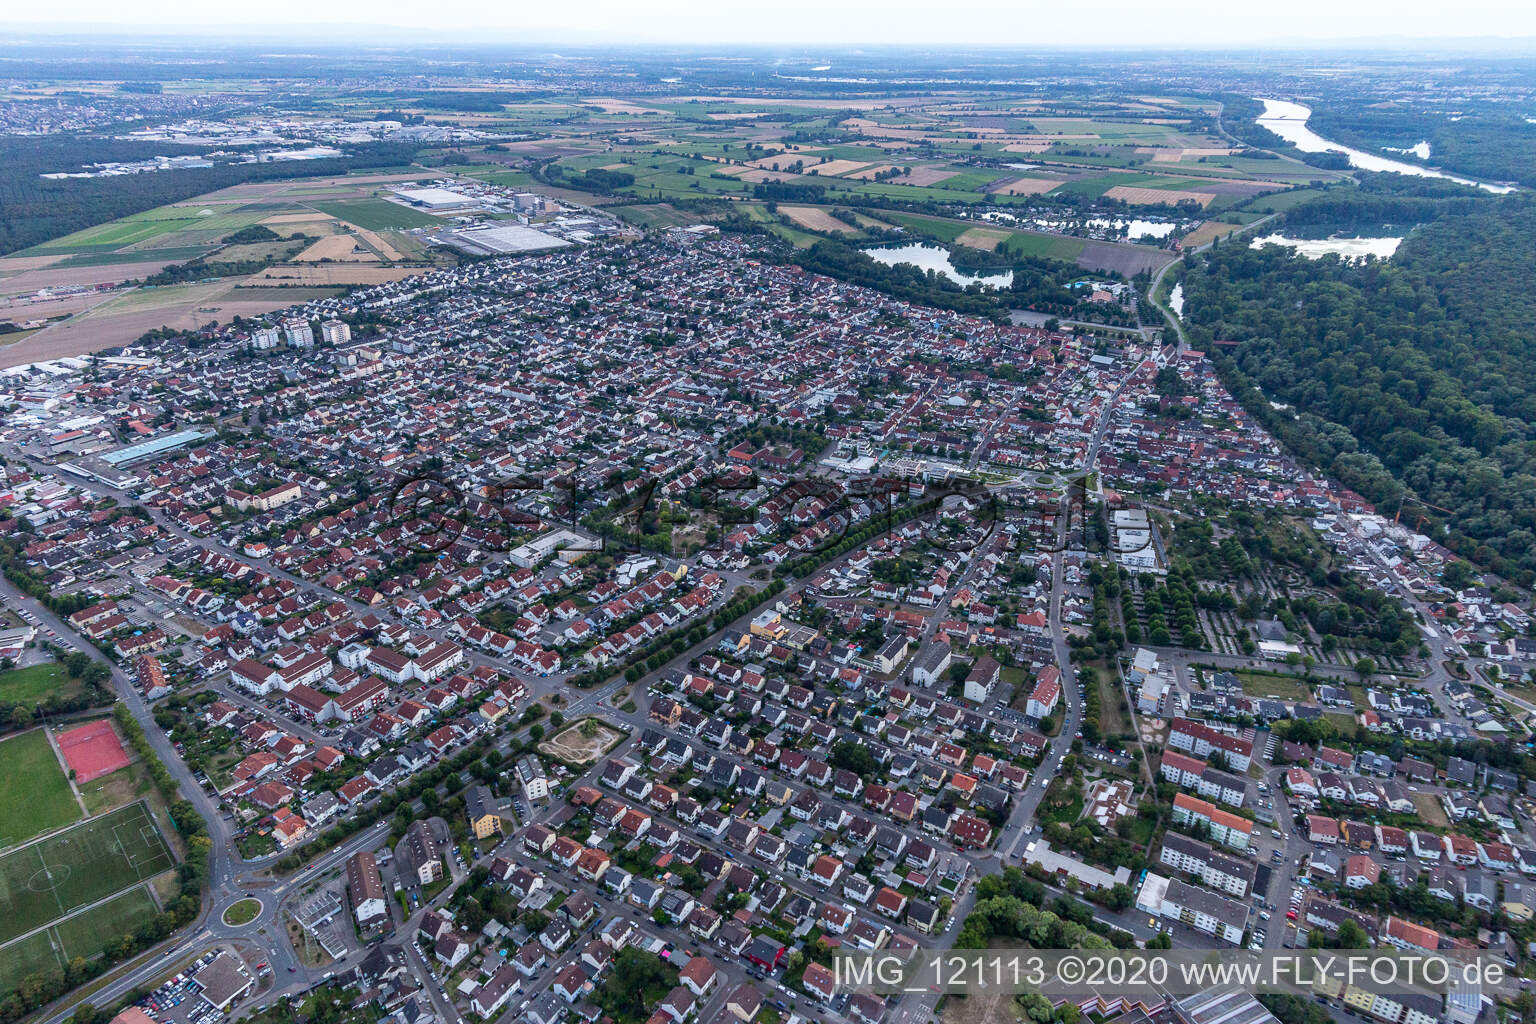 Drone recording of Ketsch in the state Baden-Wuerttemberg, Germany